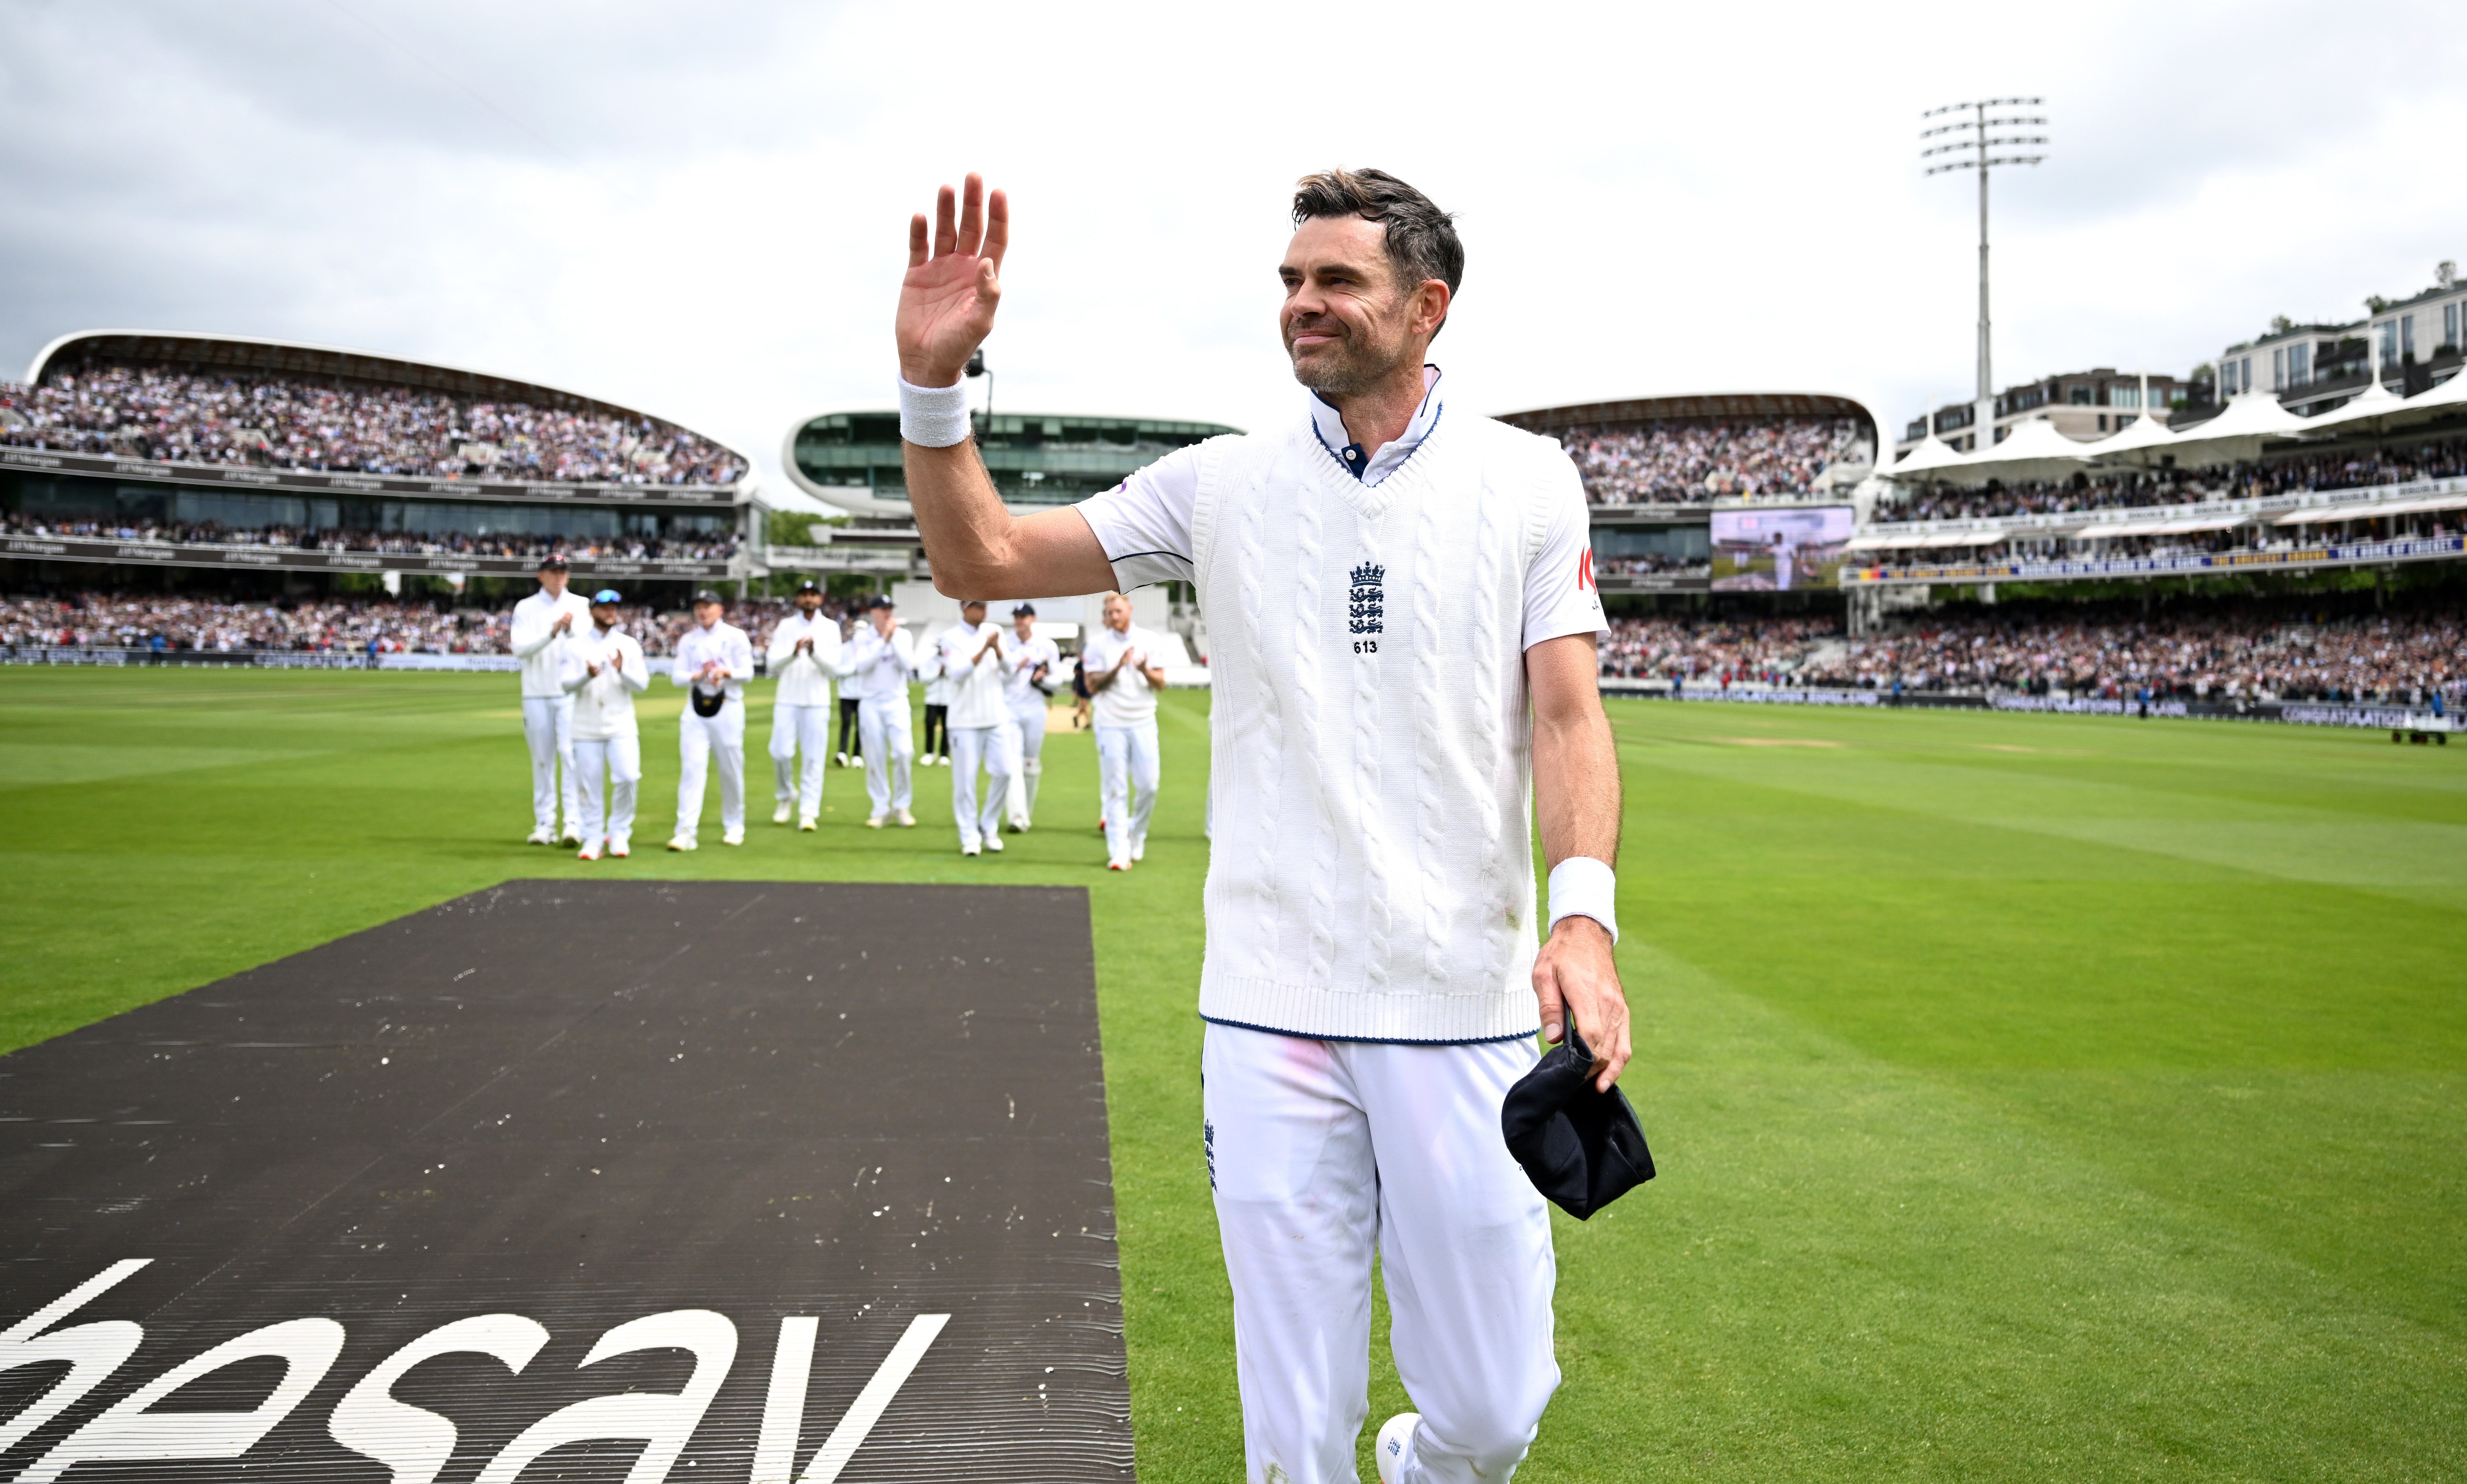 James Anderson led England off the field at Lord’s after their win over the West Indies